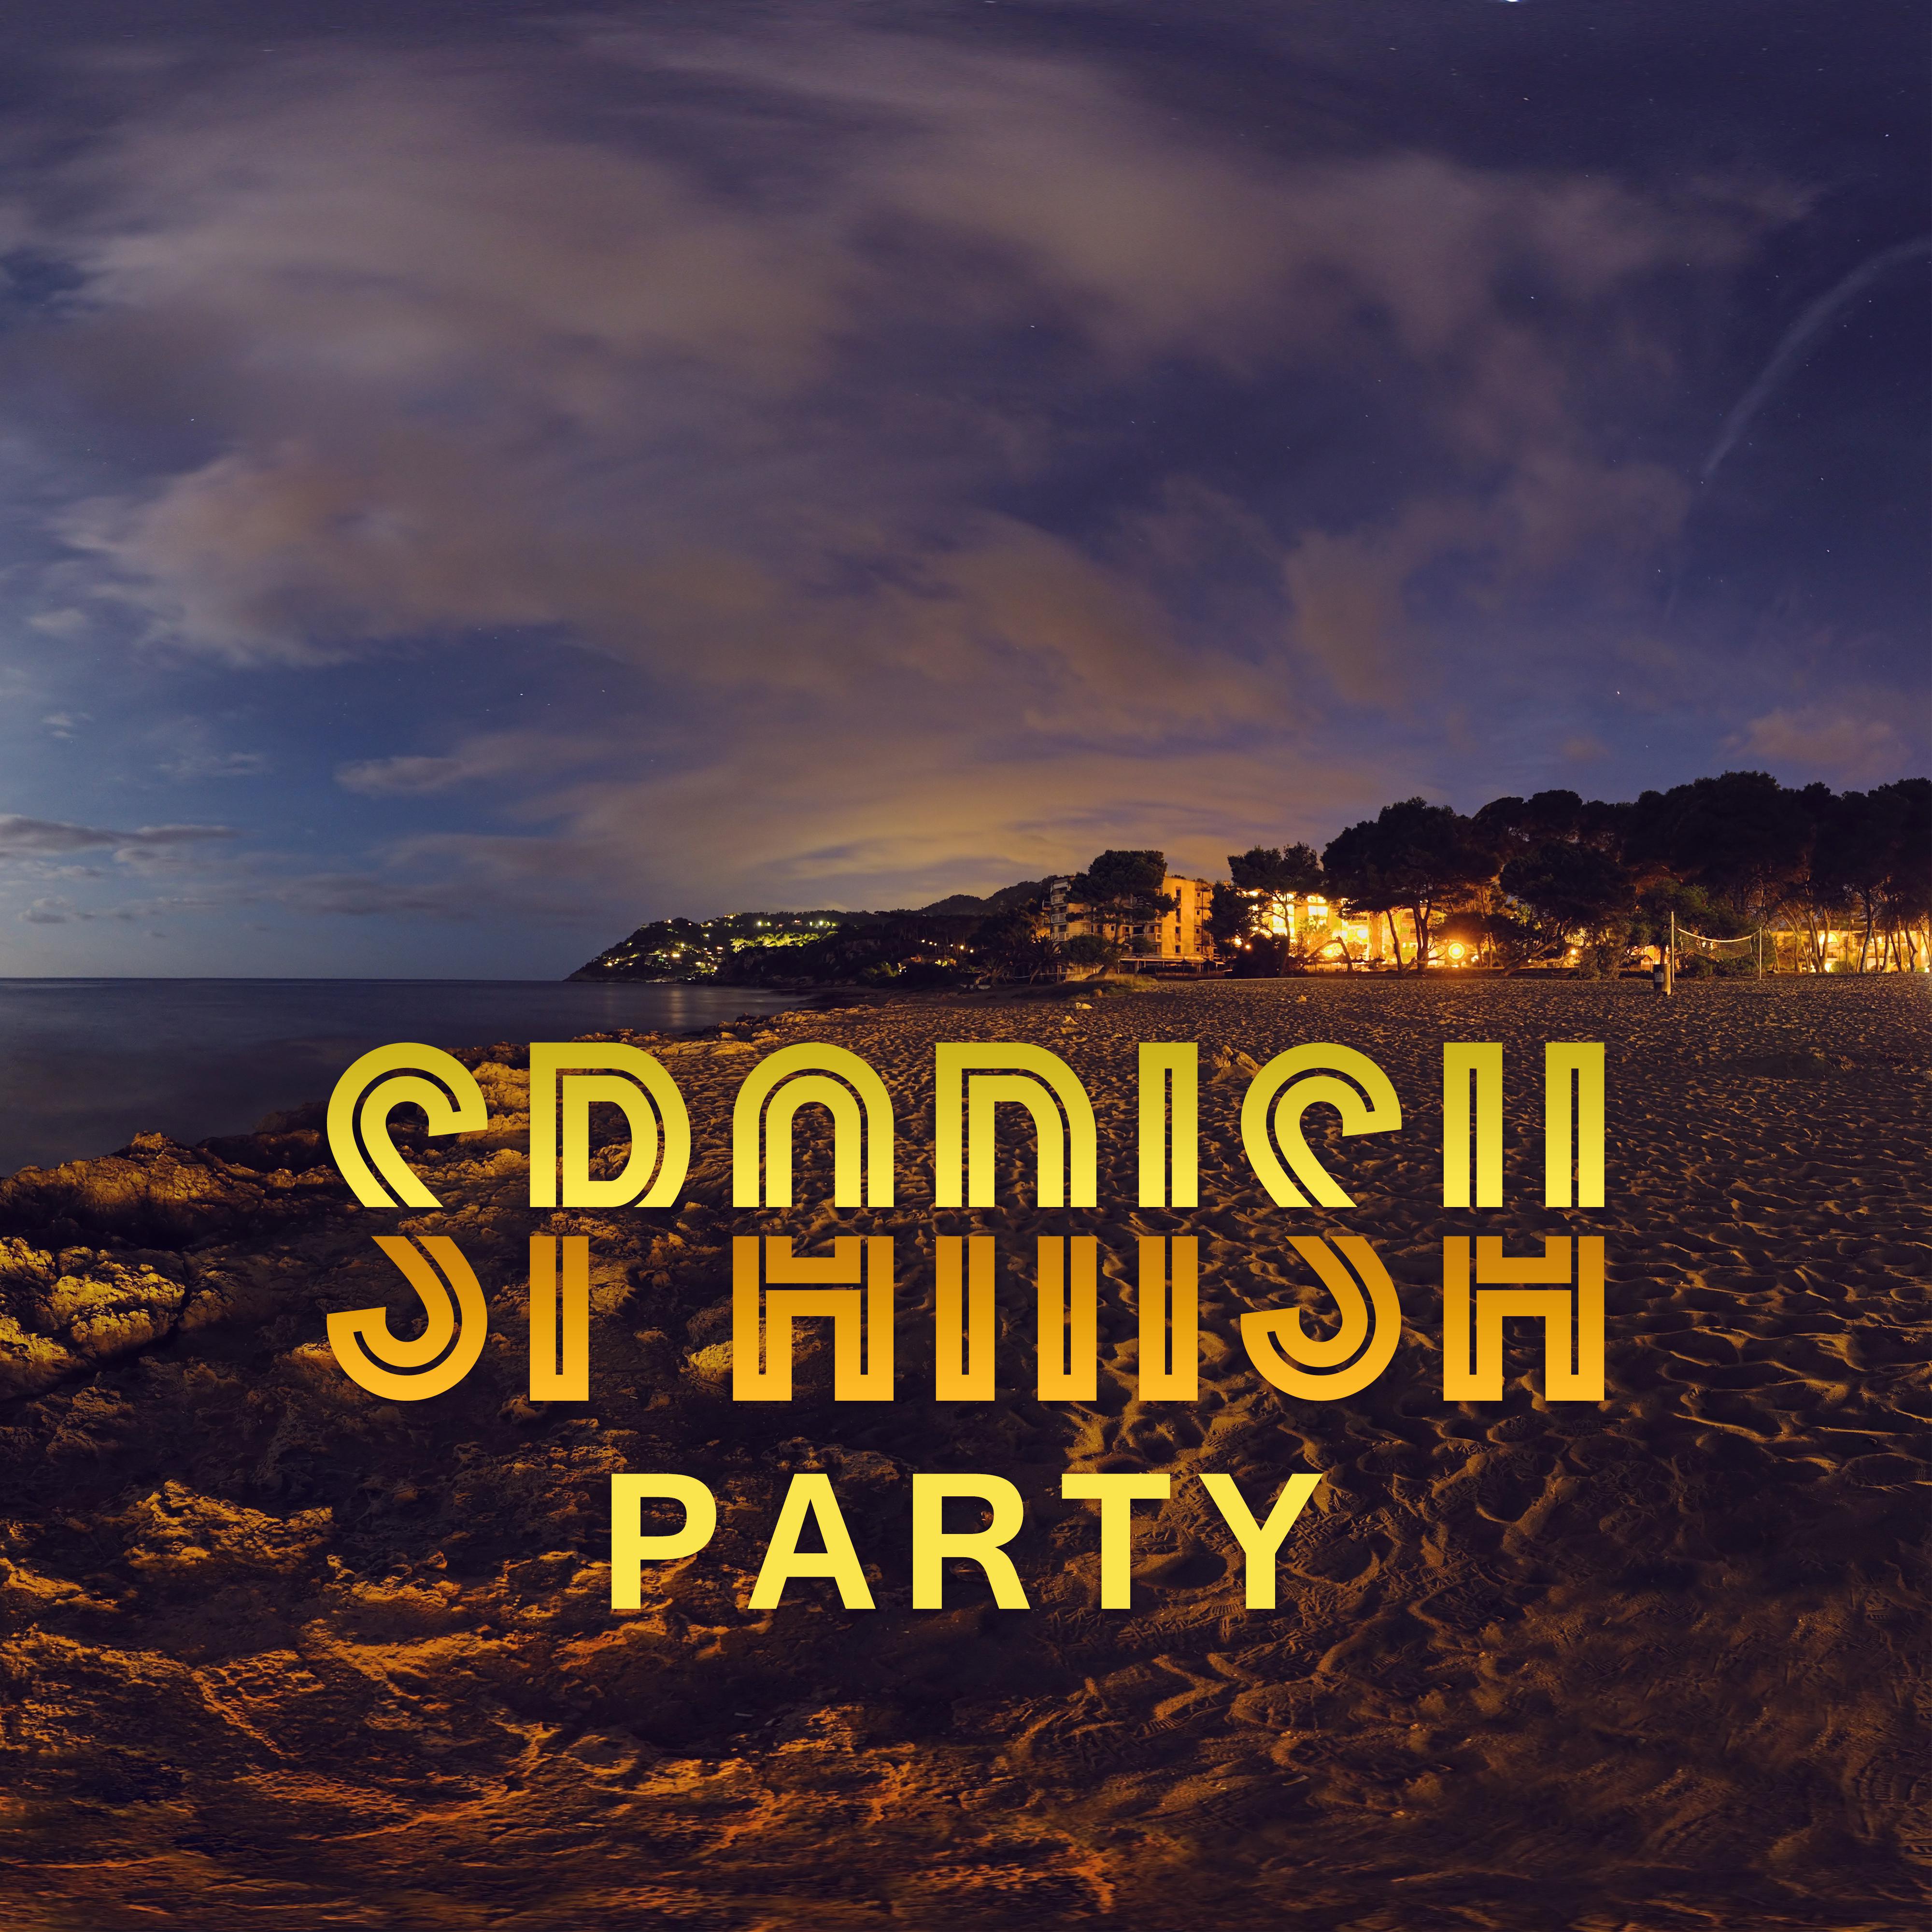 Spanish Party – Holiday Chill, Party Time, Beach Chill, Dancefloor, Good Vibes, Dance Party, Summertime 2017